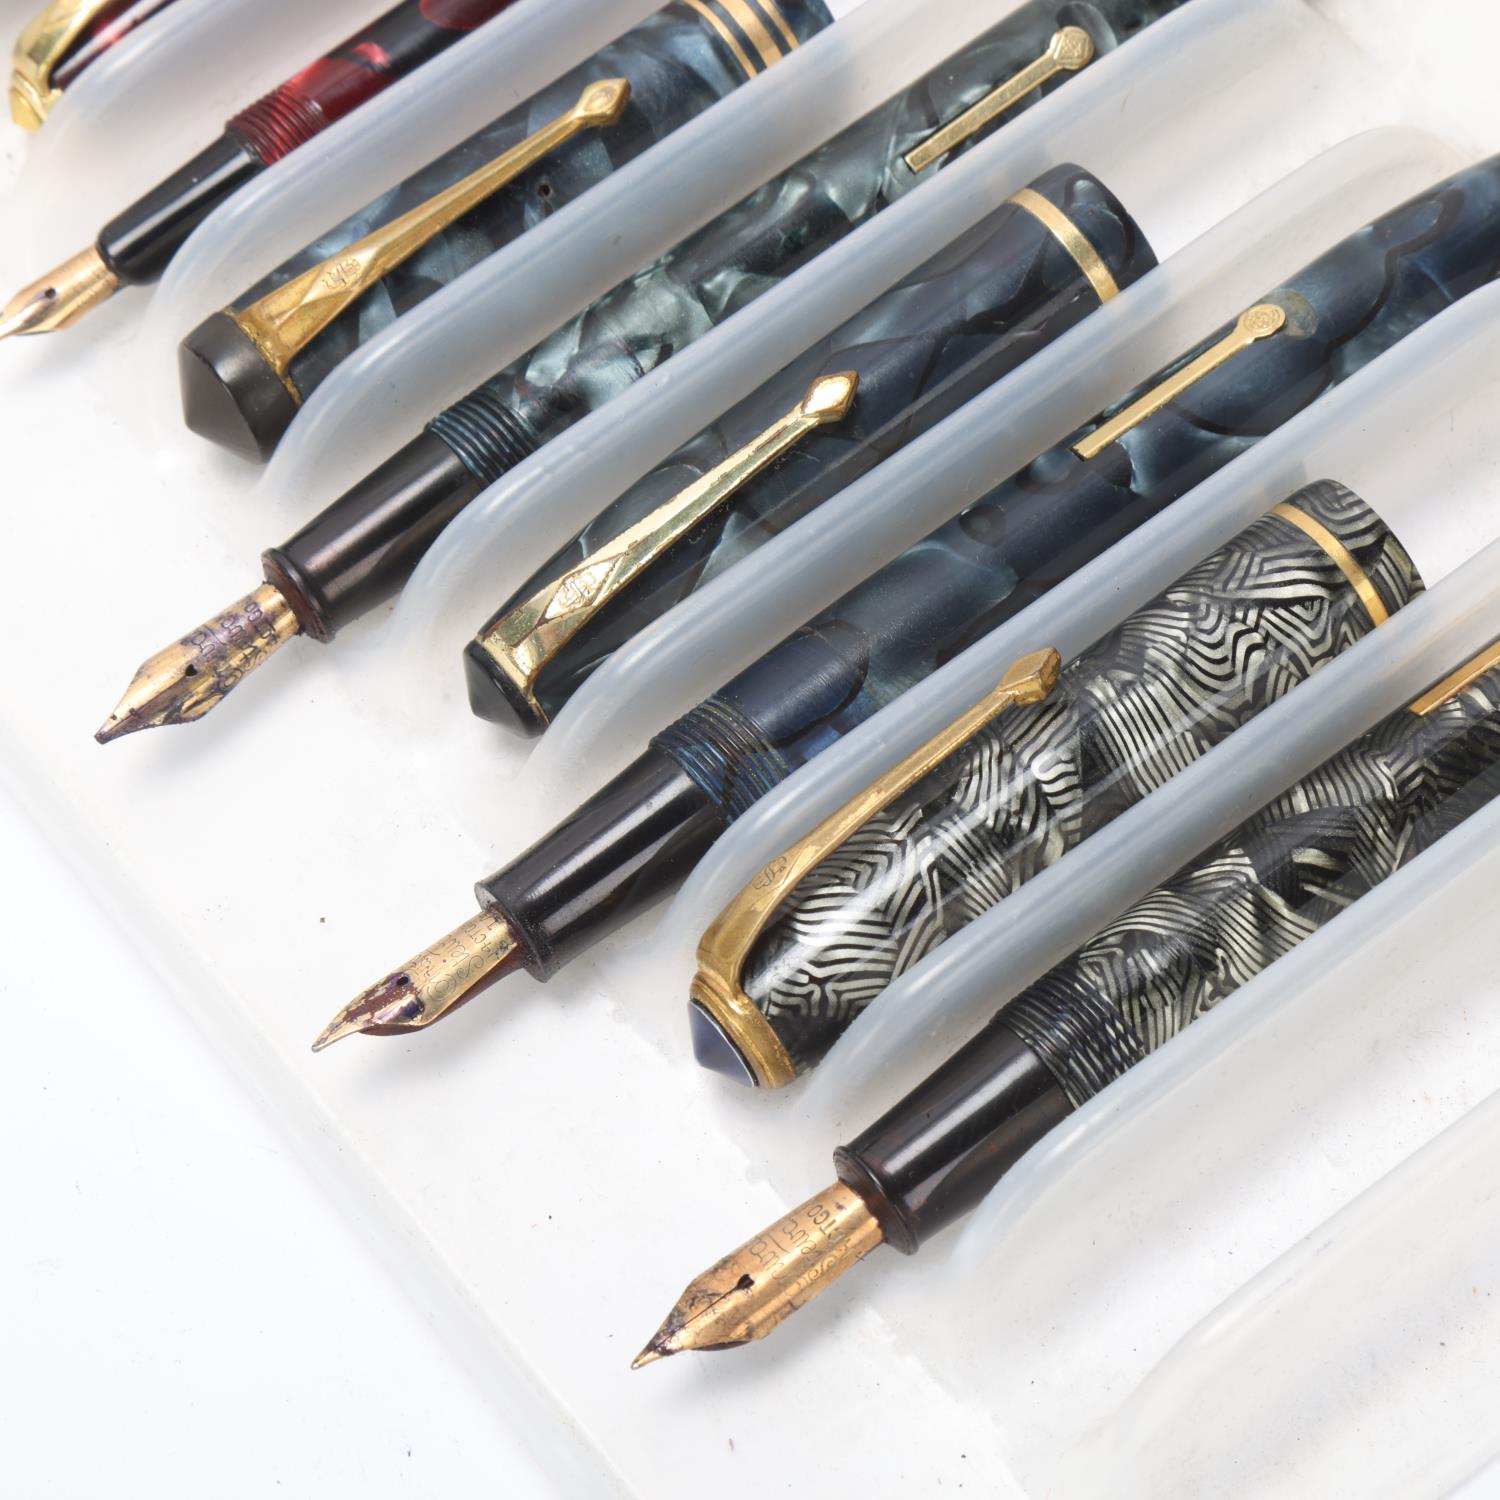 5 Vintage Conway Stewart fountain pens, all lever fill with marble resin bodies and 14ct gold - Image 2 of 4